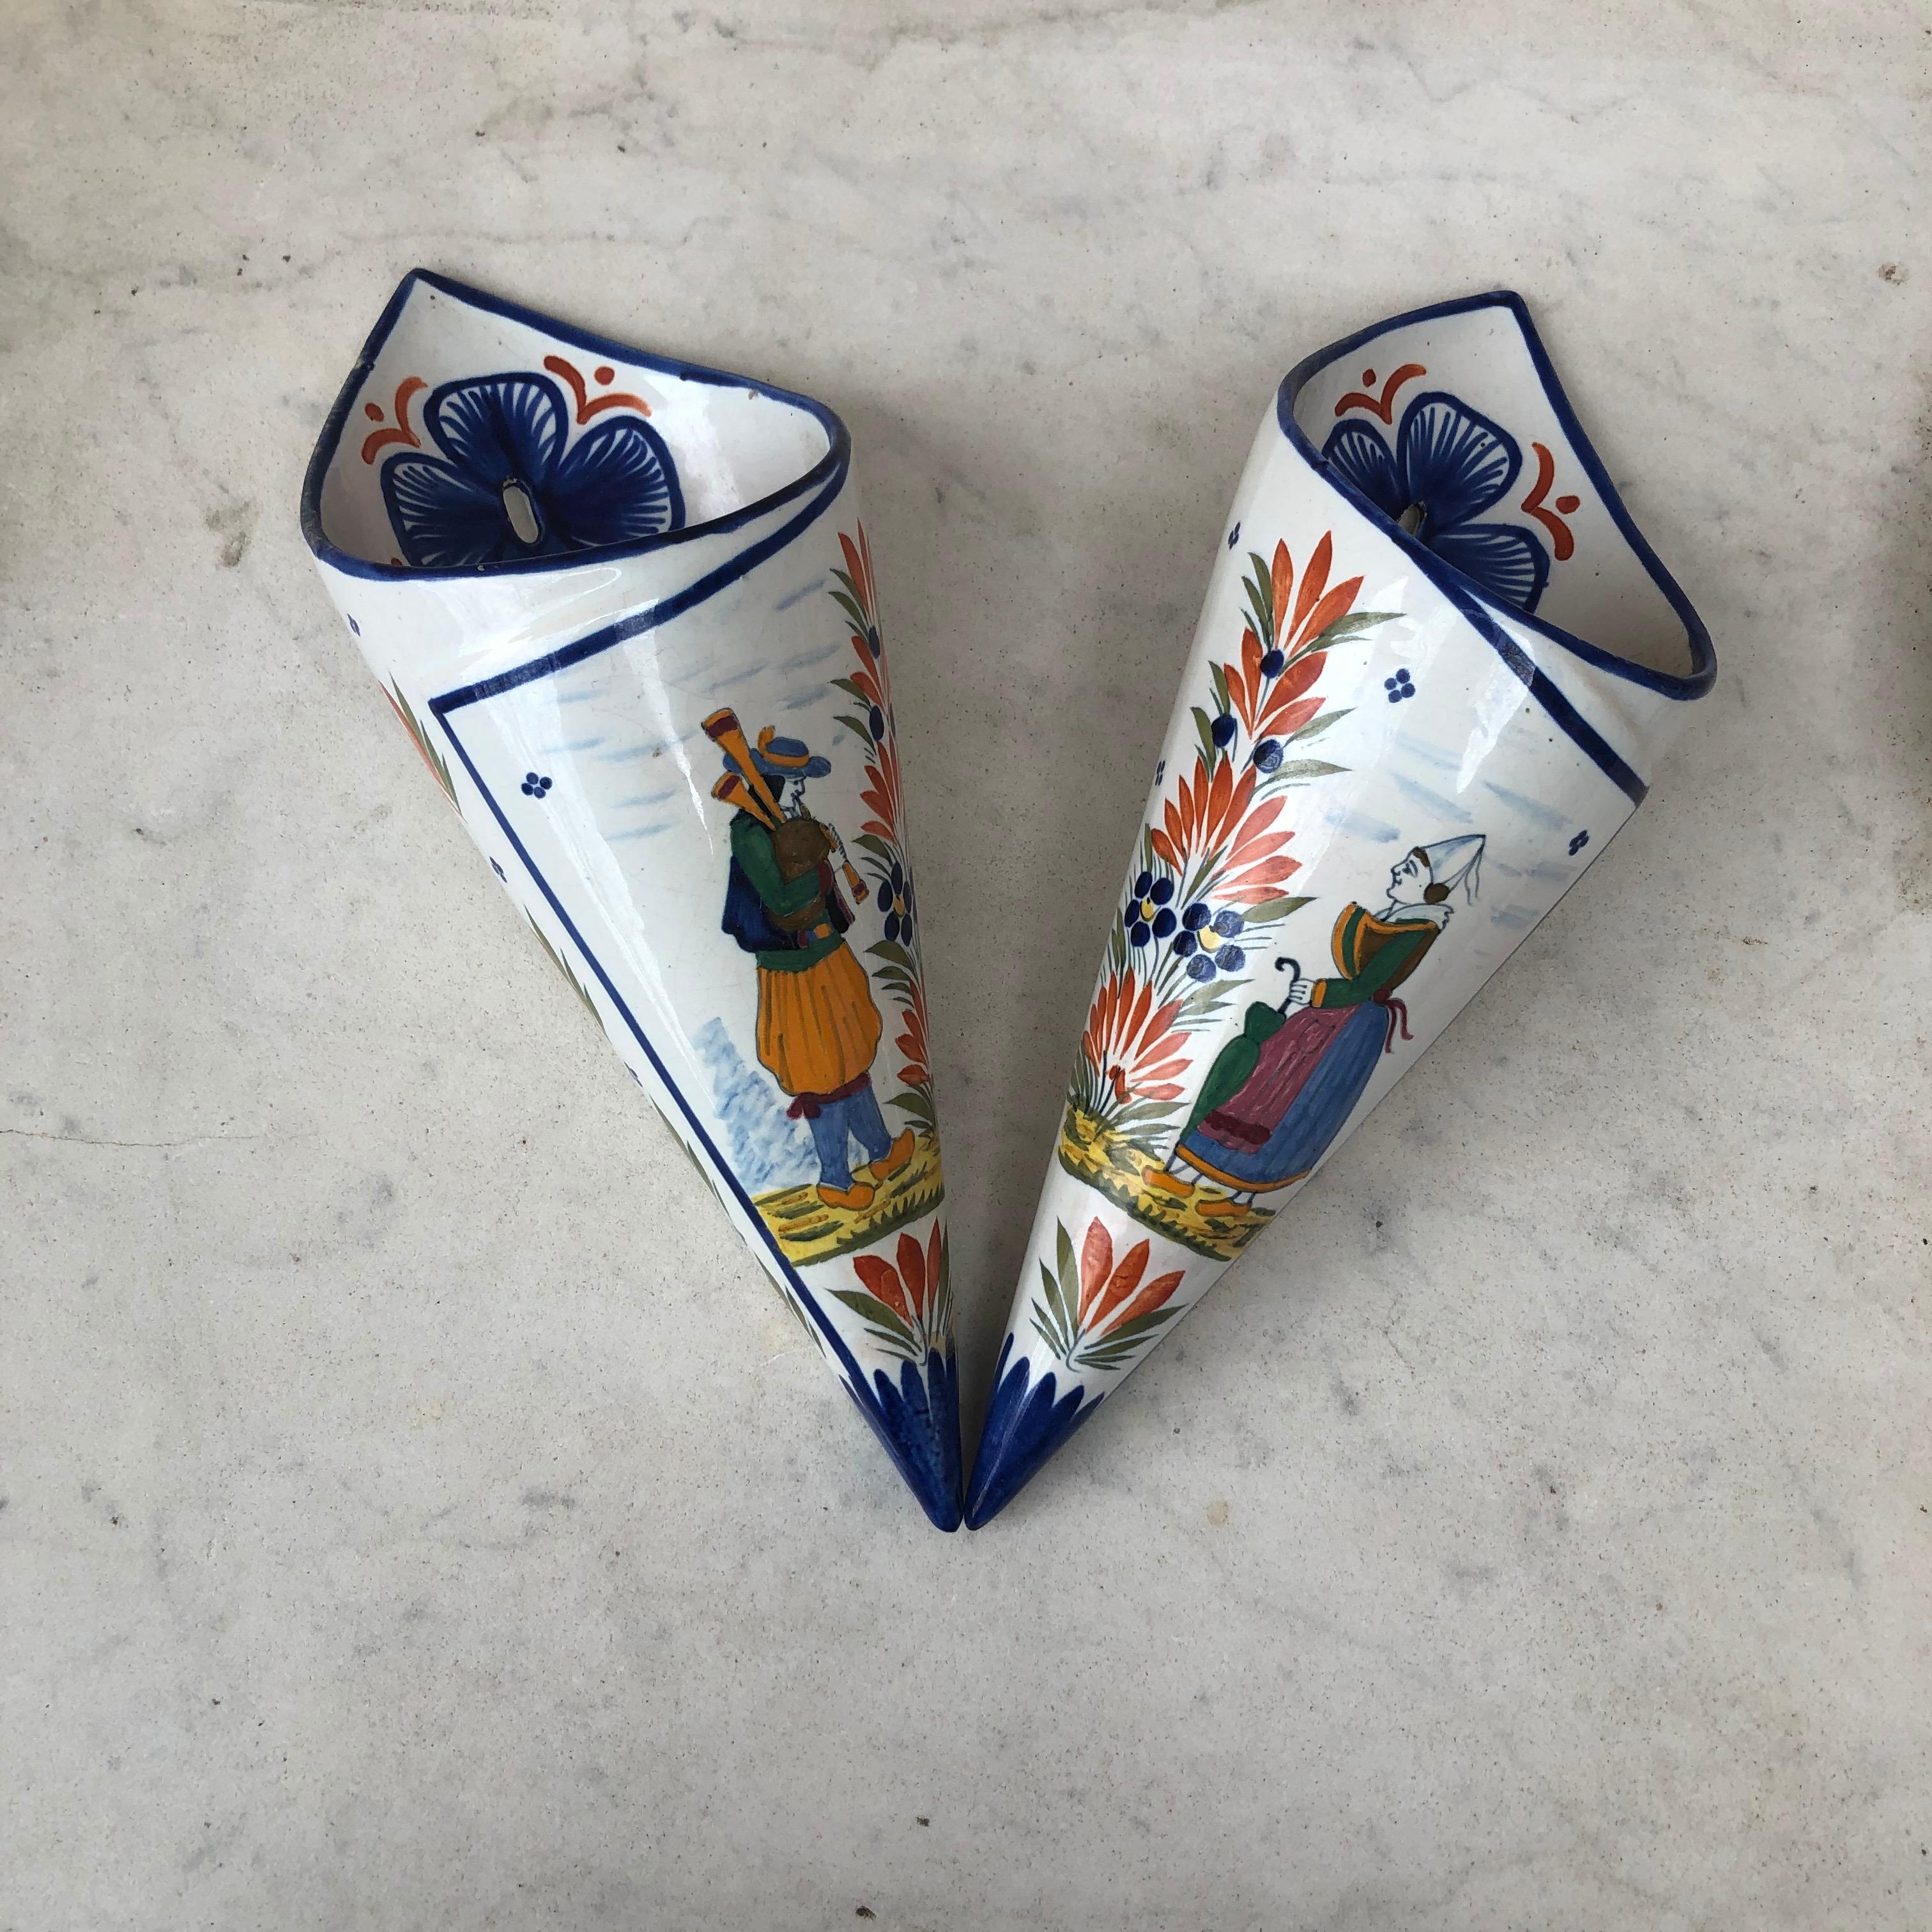 Pair of French Faience wall pocket signed Henriot Quimper, circa 1900.
Hand painted with a couple of bretons and flowers.